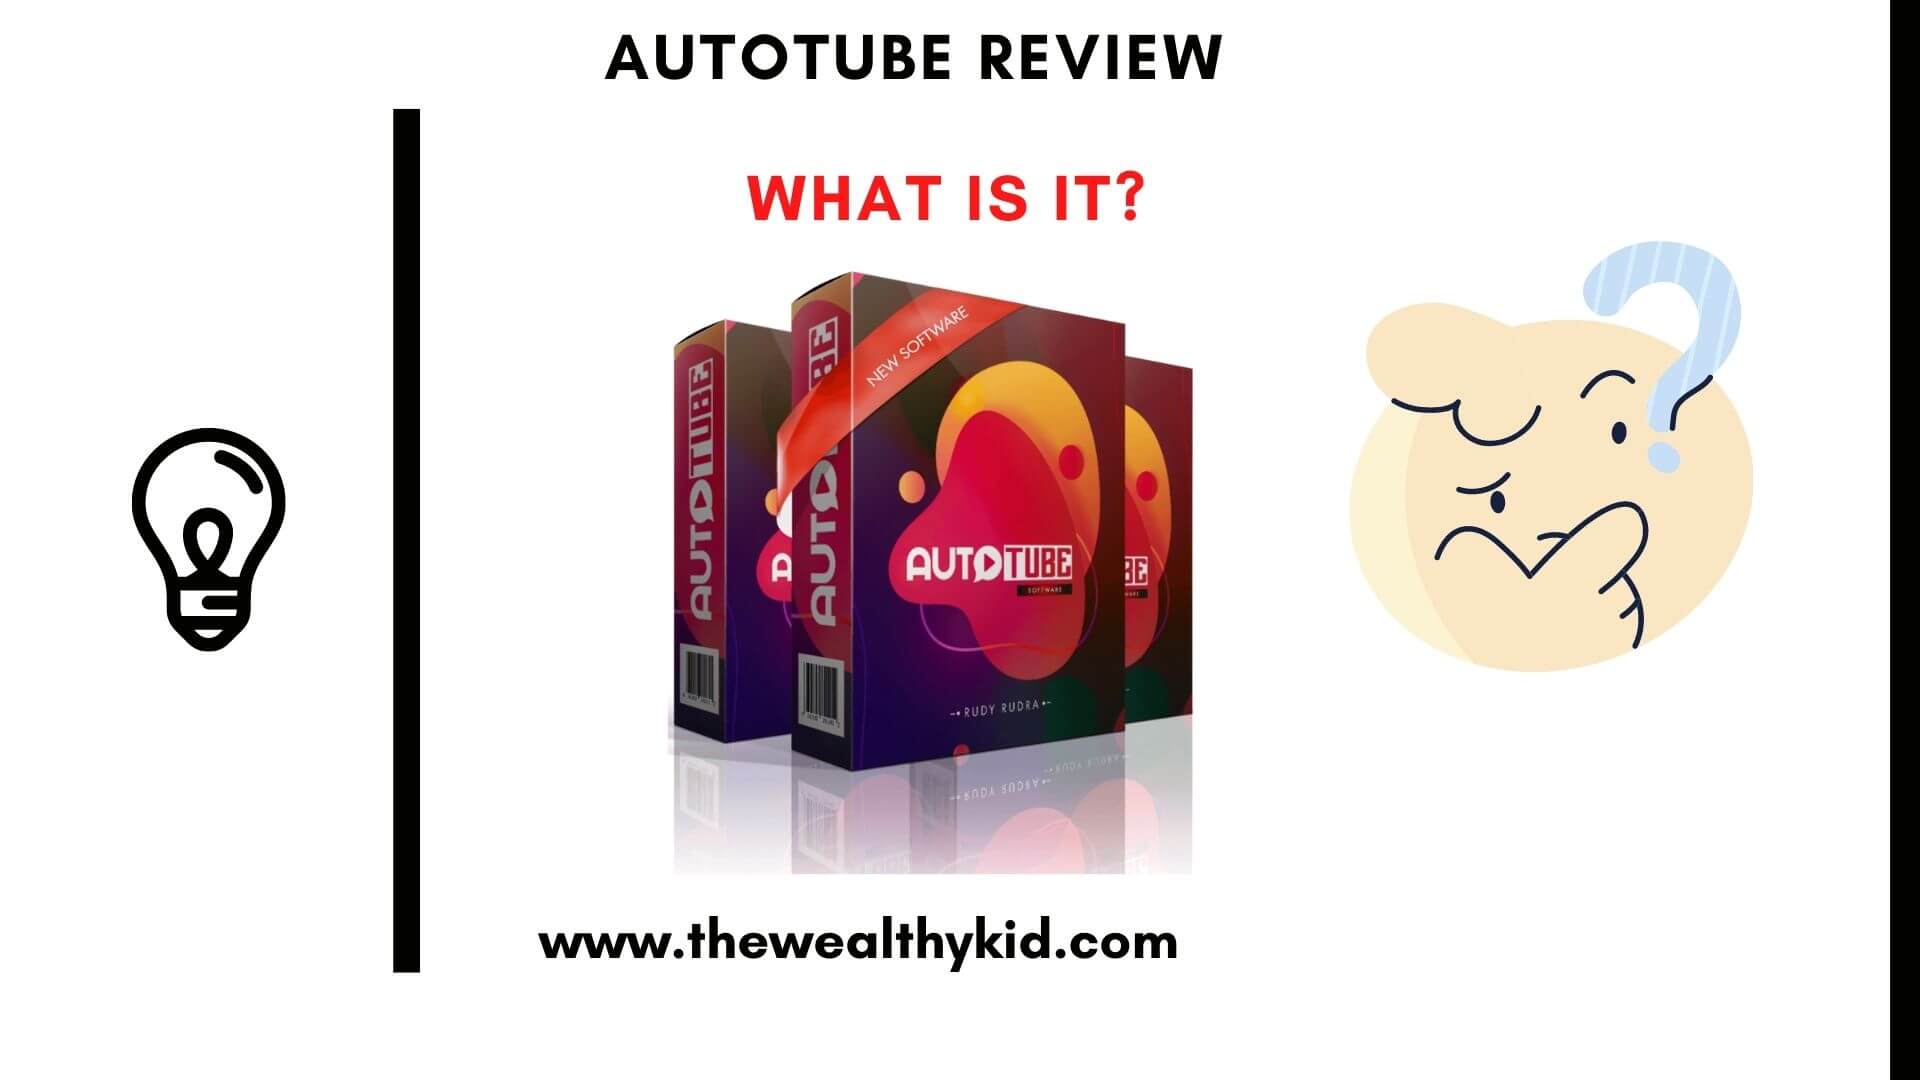 what is AutoTube about